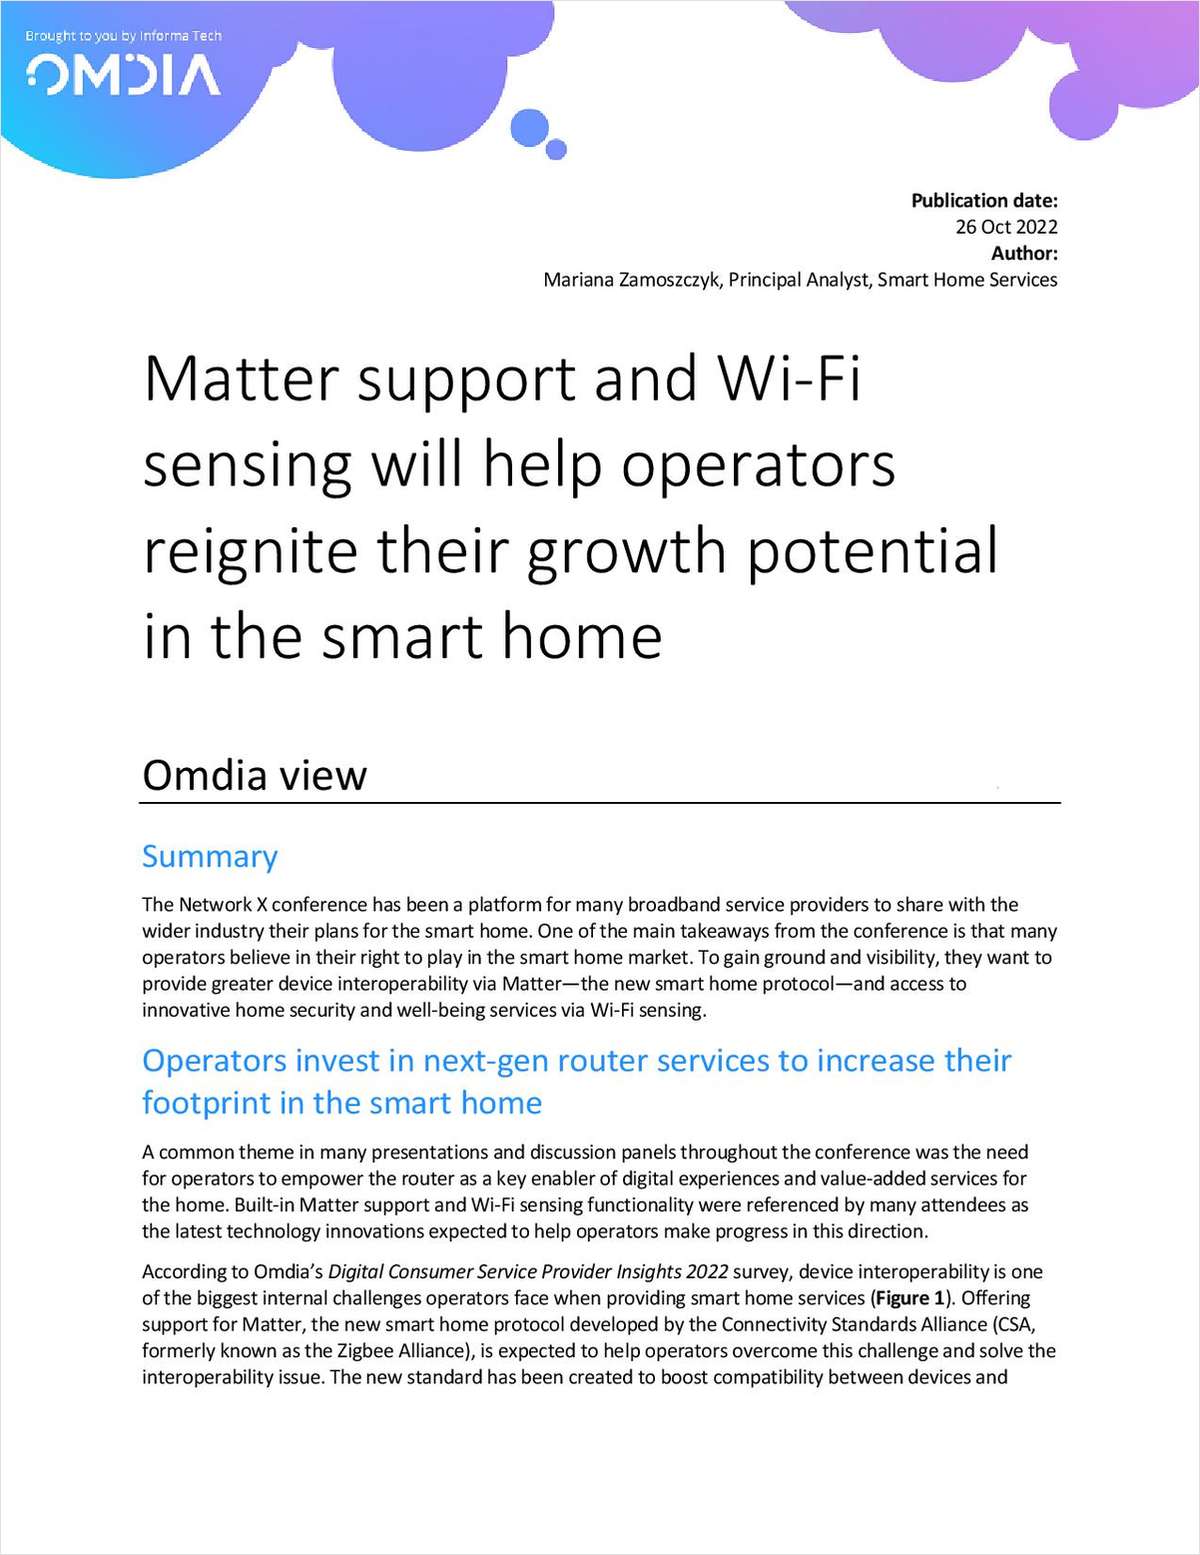 Matter support and Wi-Fi sensing